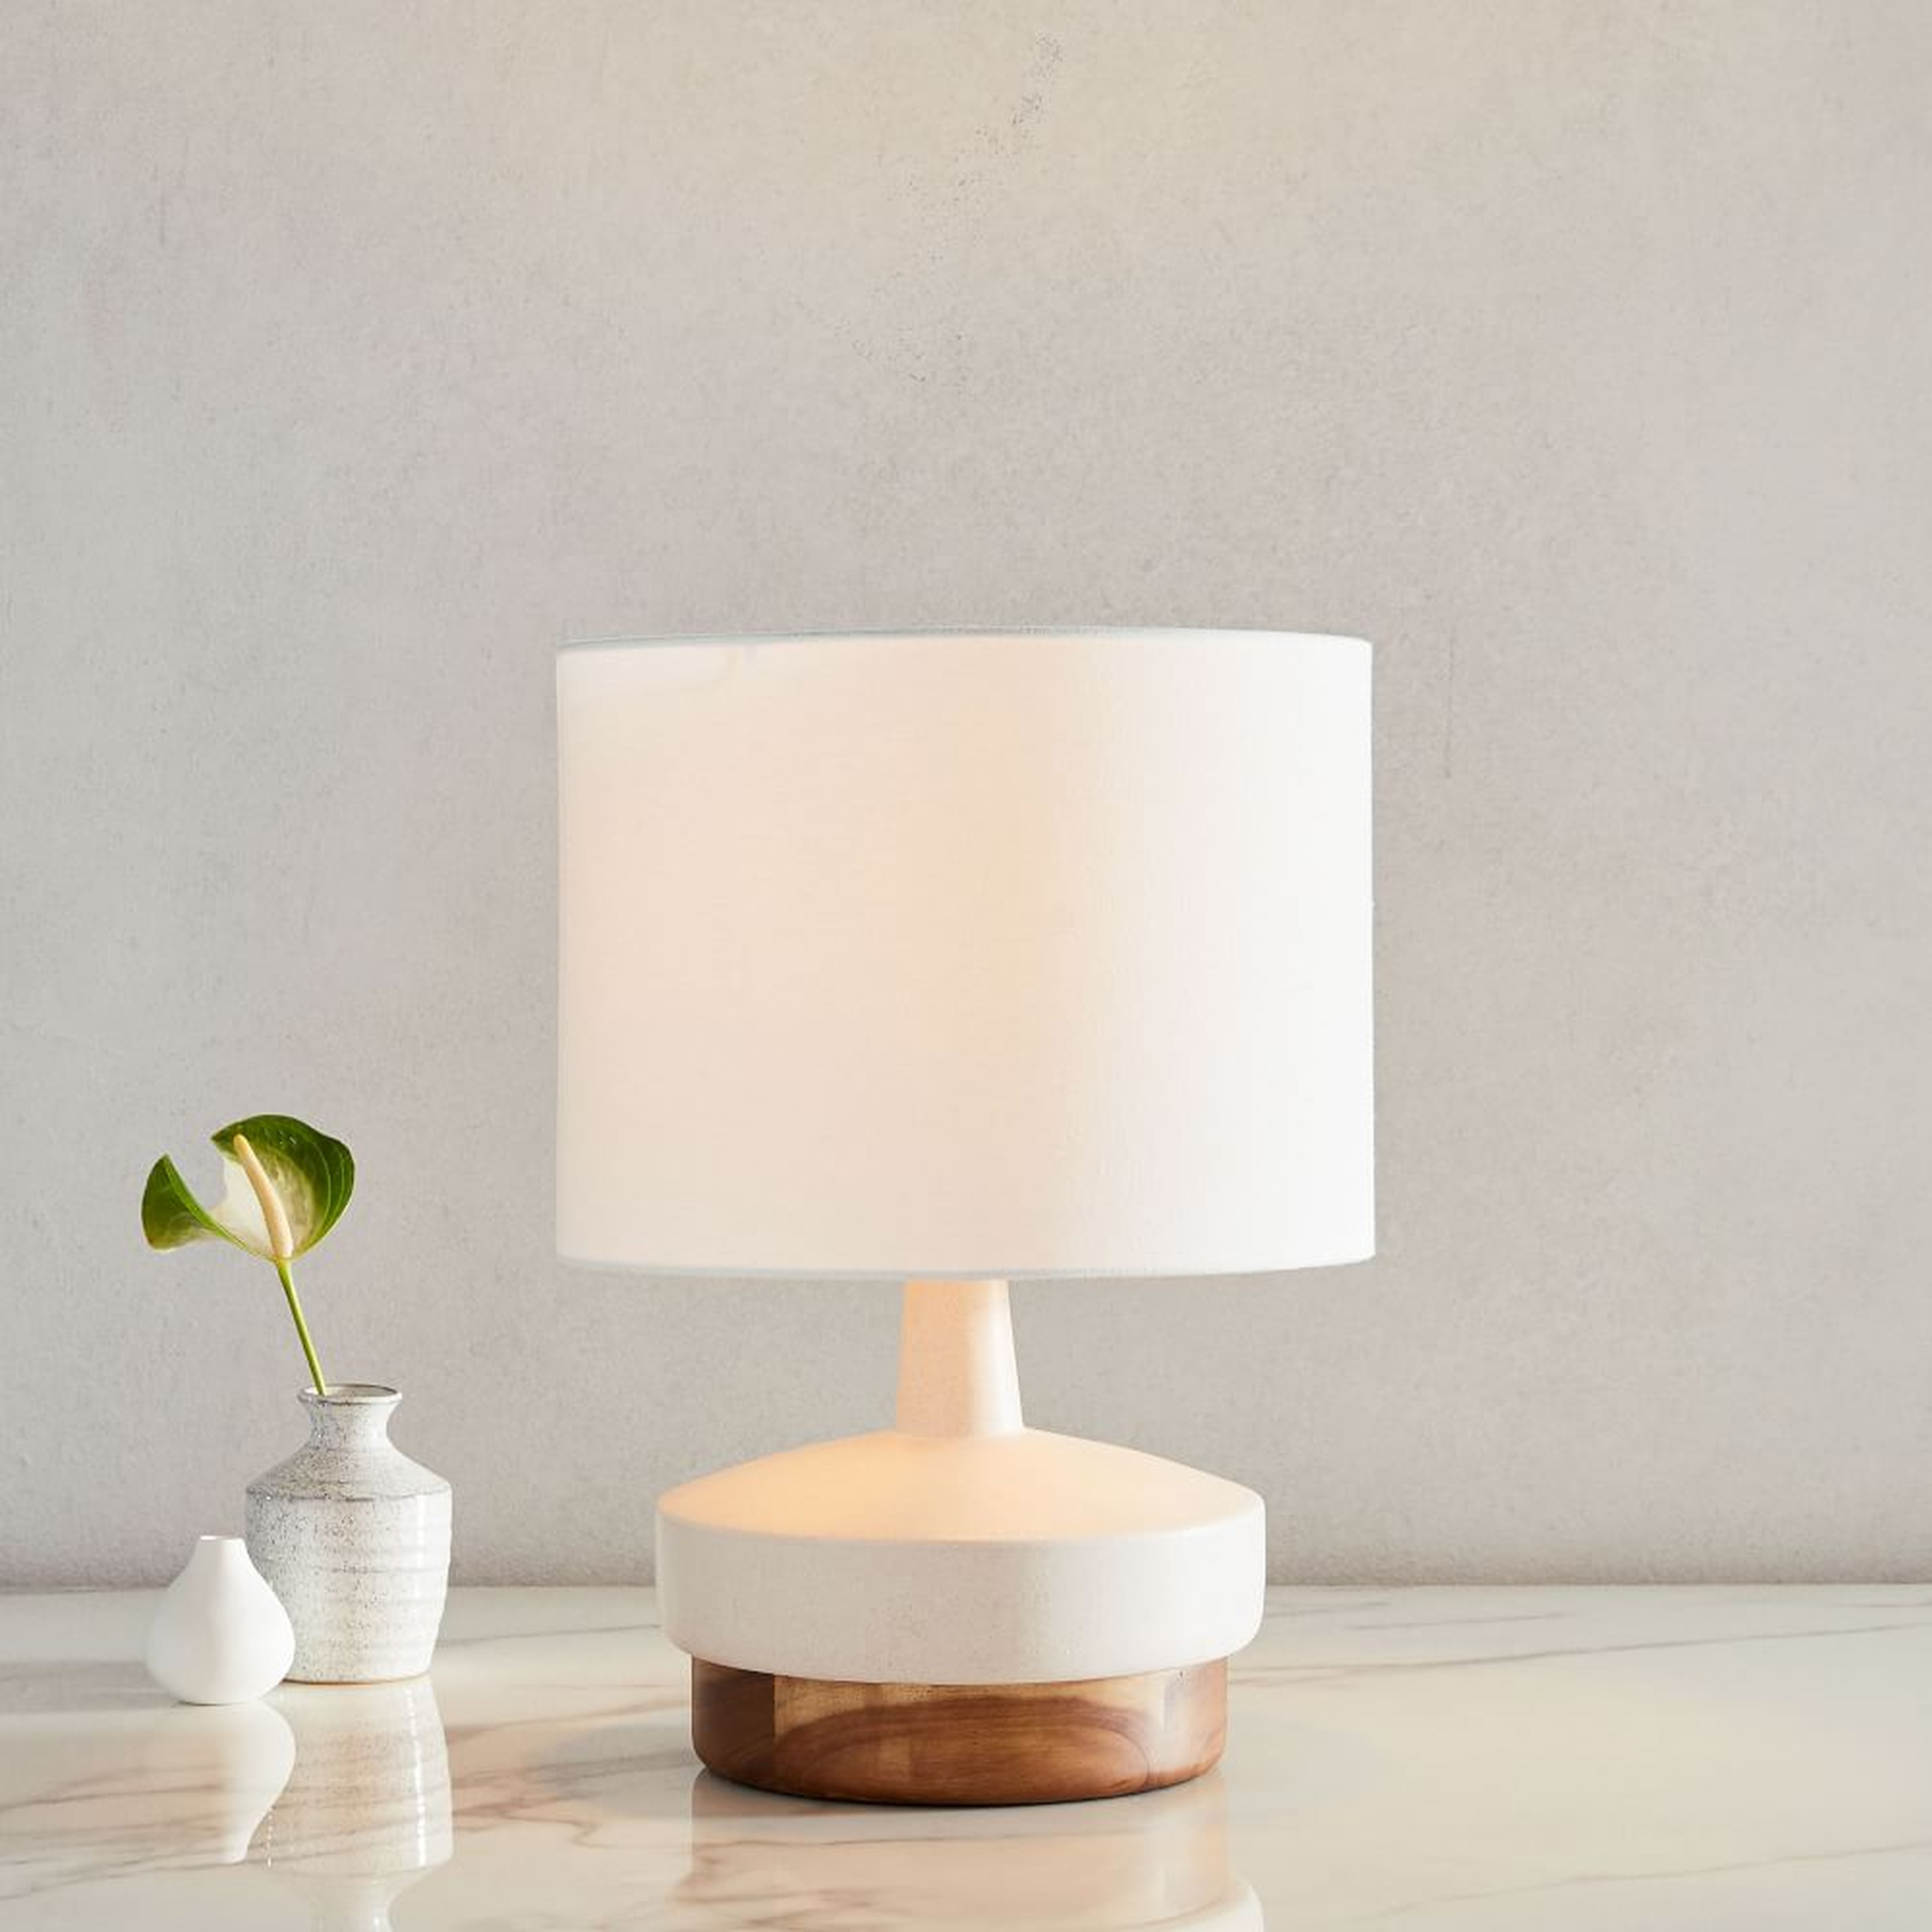 Wood + Ceramic Table Lamp, Small, White, Set of 2 - West Elm